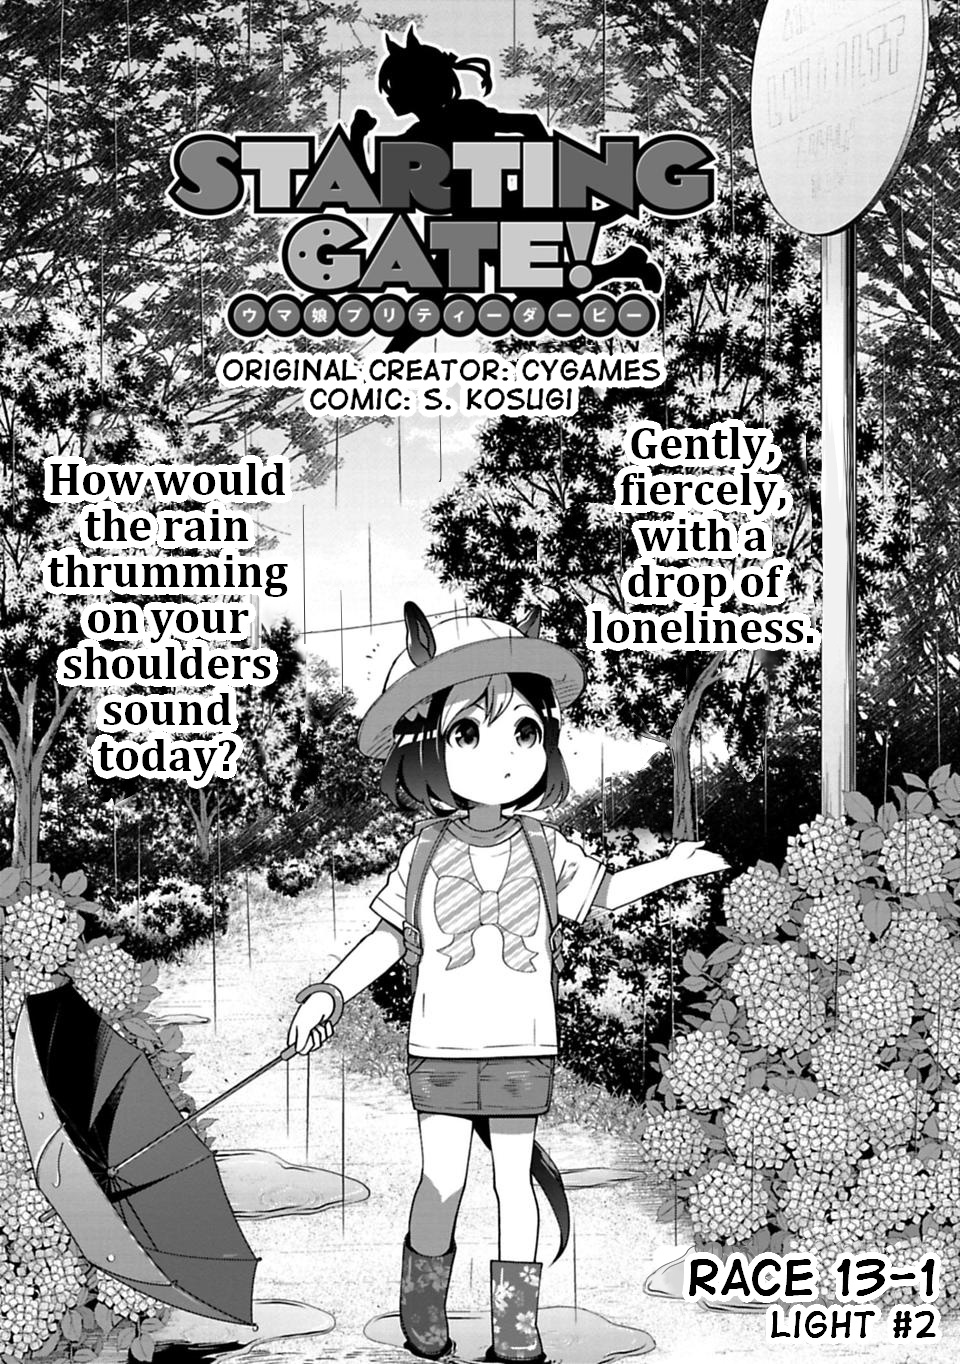 Starting Gate! Uma Musume Pretty Derby Vol.2 Chapter 13: Light #2 Part 1 - Picture 2